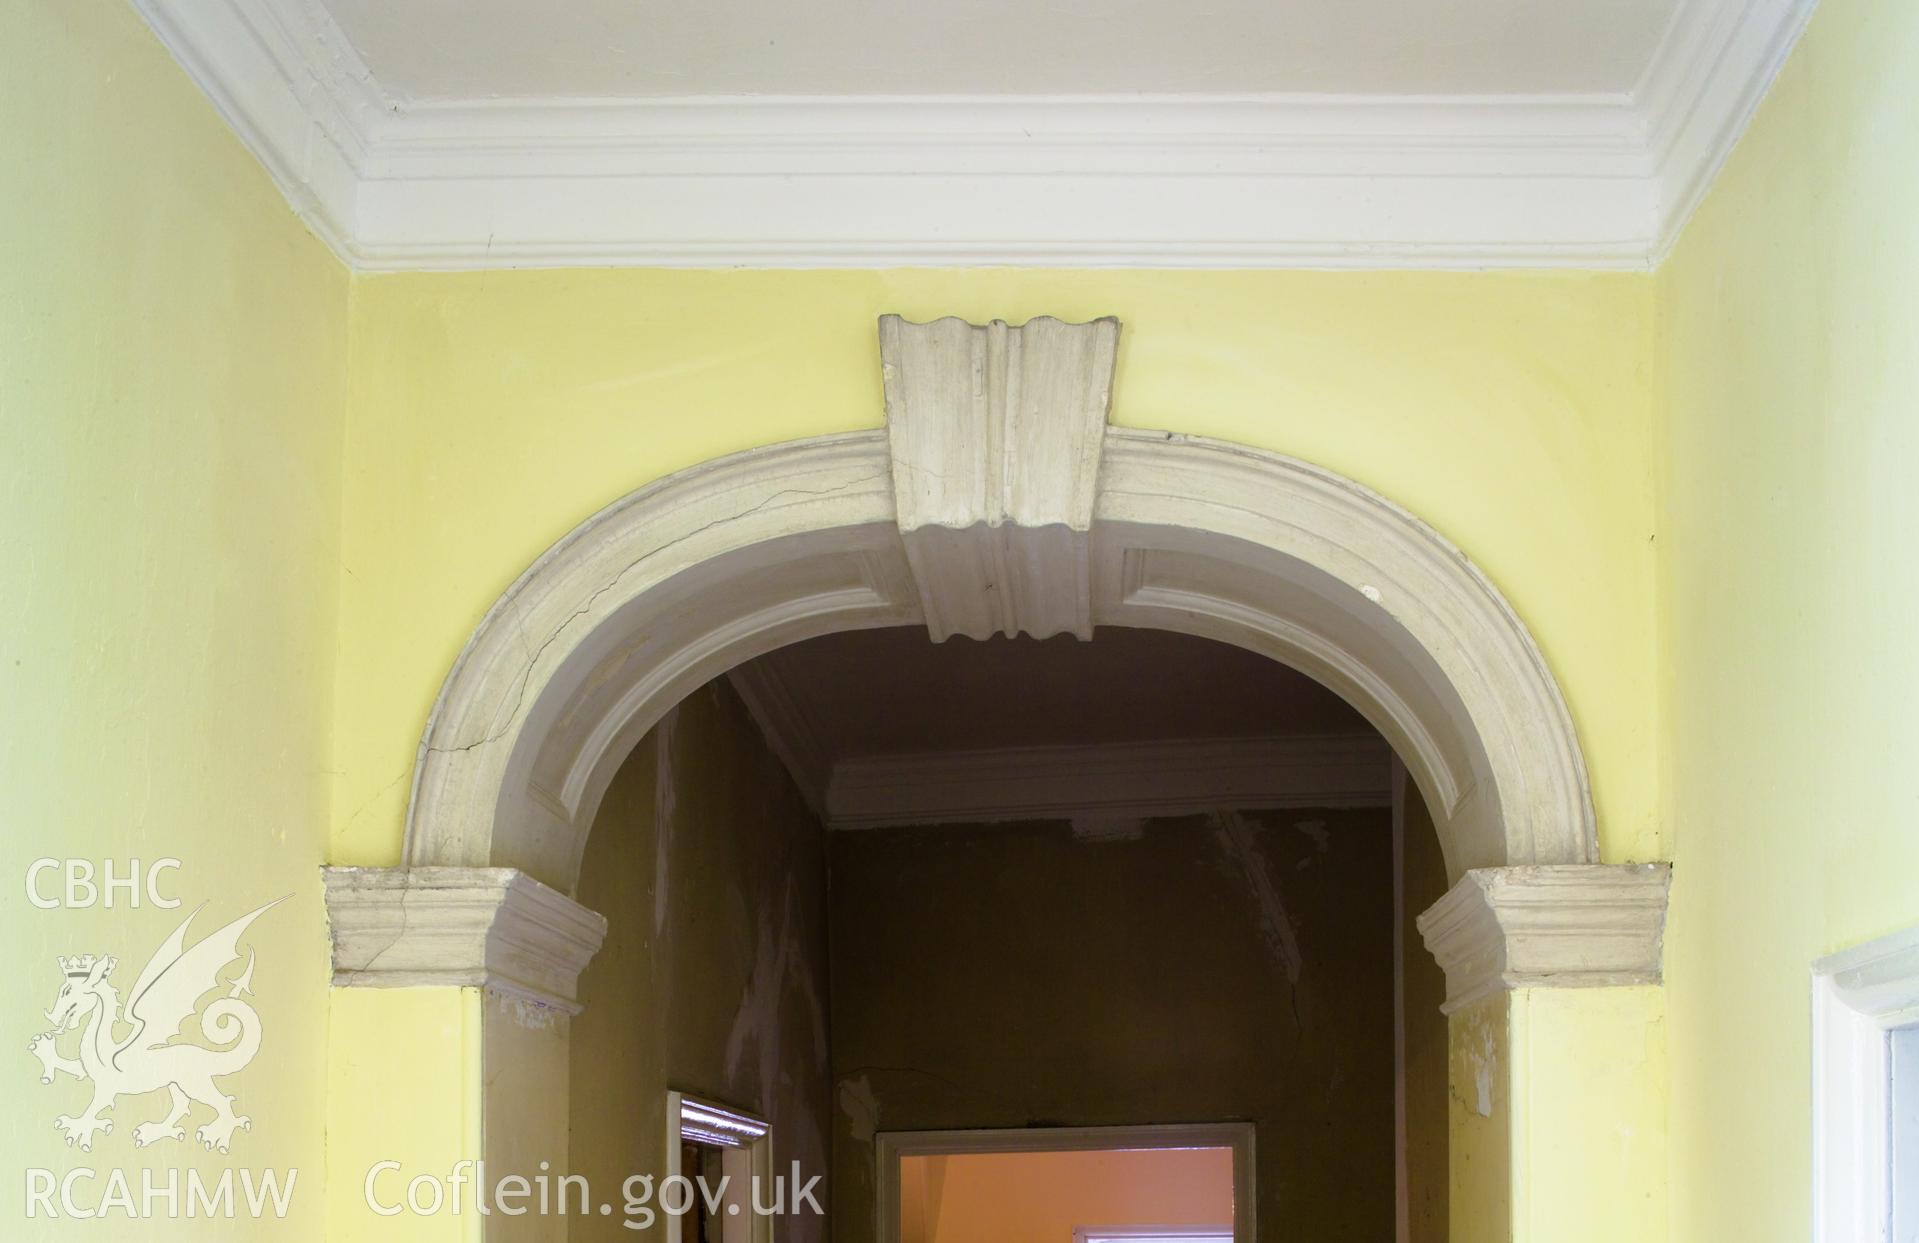 Plaster decoration over passage way openings.